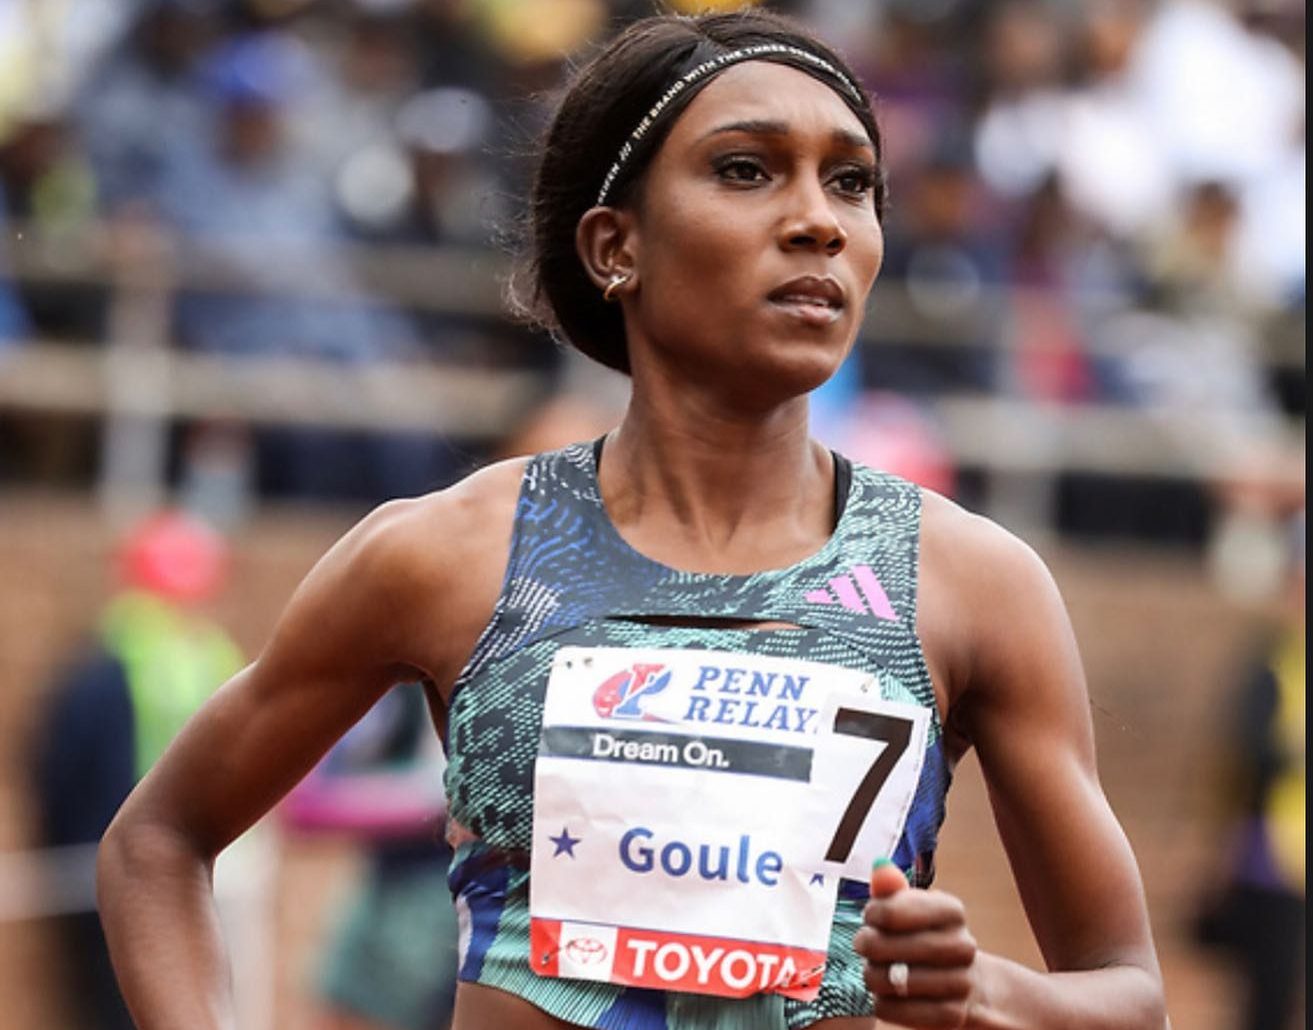 Natoya Goule Vows to Keep Pushing After Second Place Finish at Penn Relays